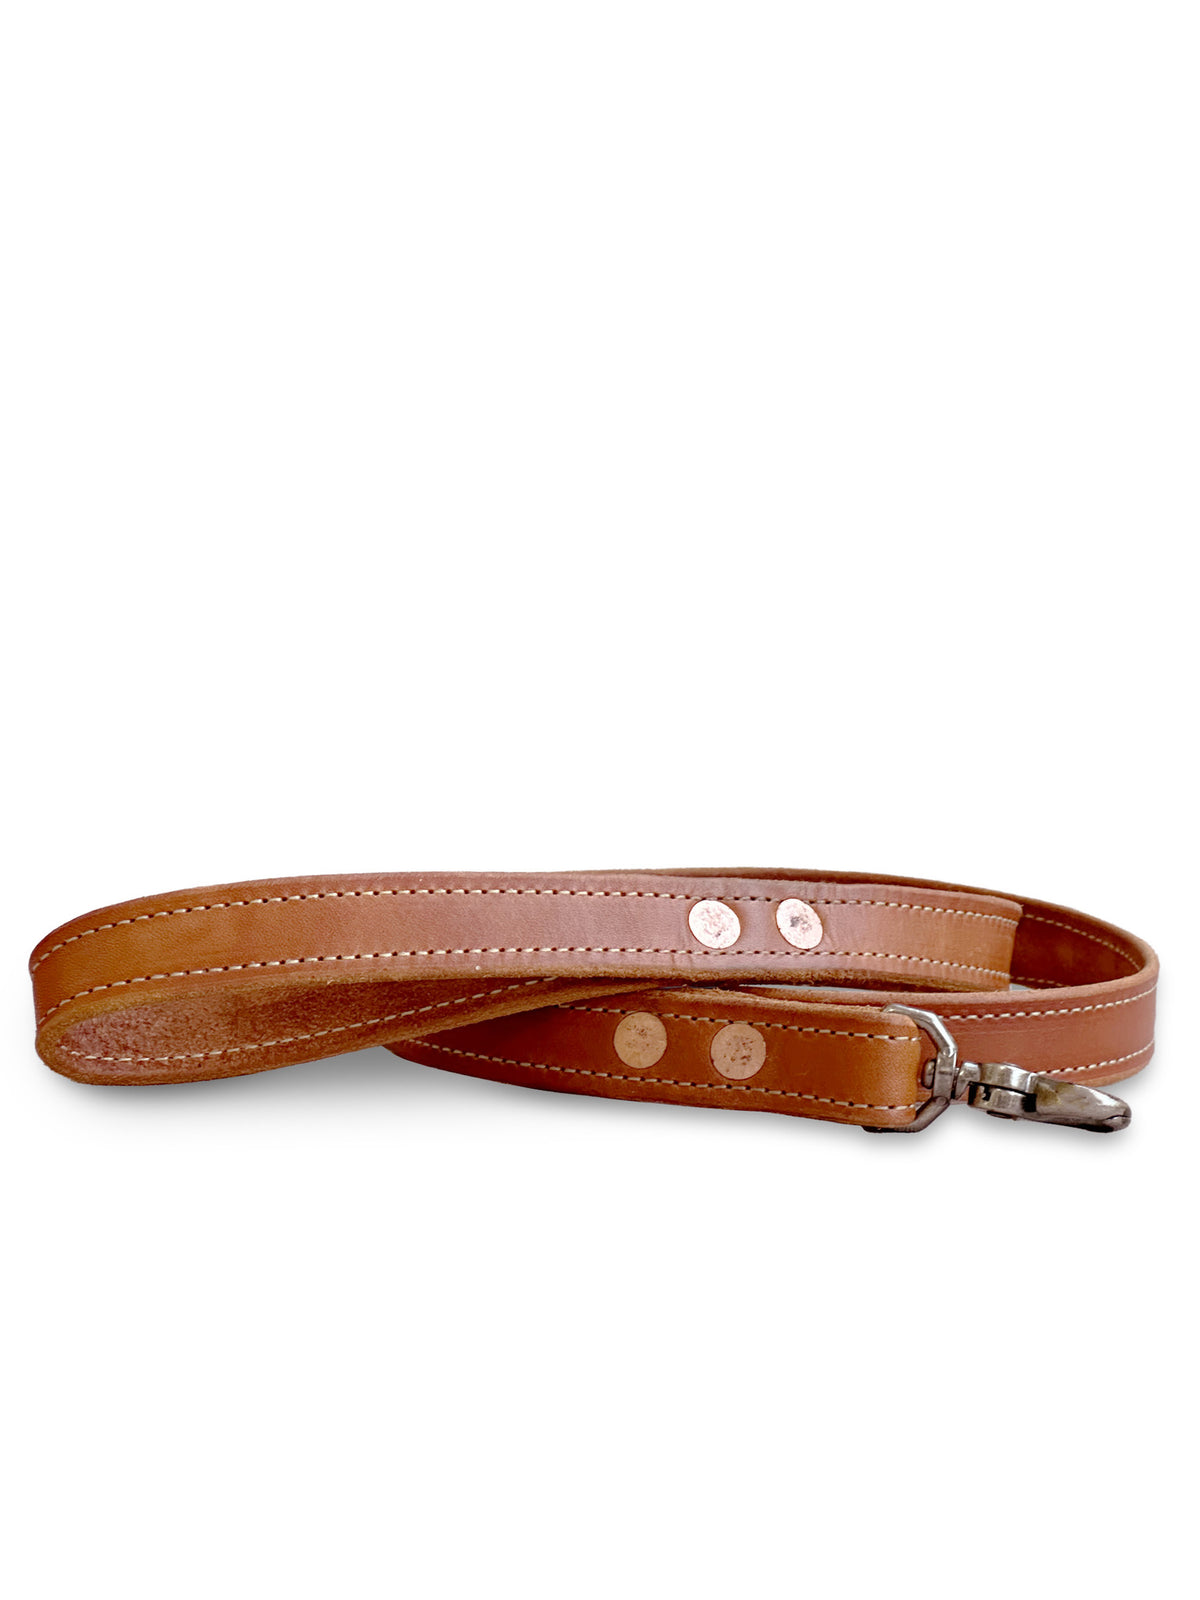 Leather Dog Leash With Stitching